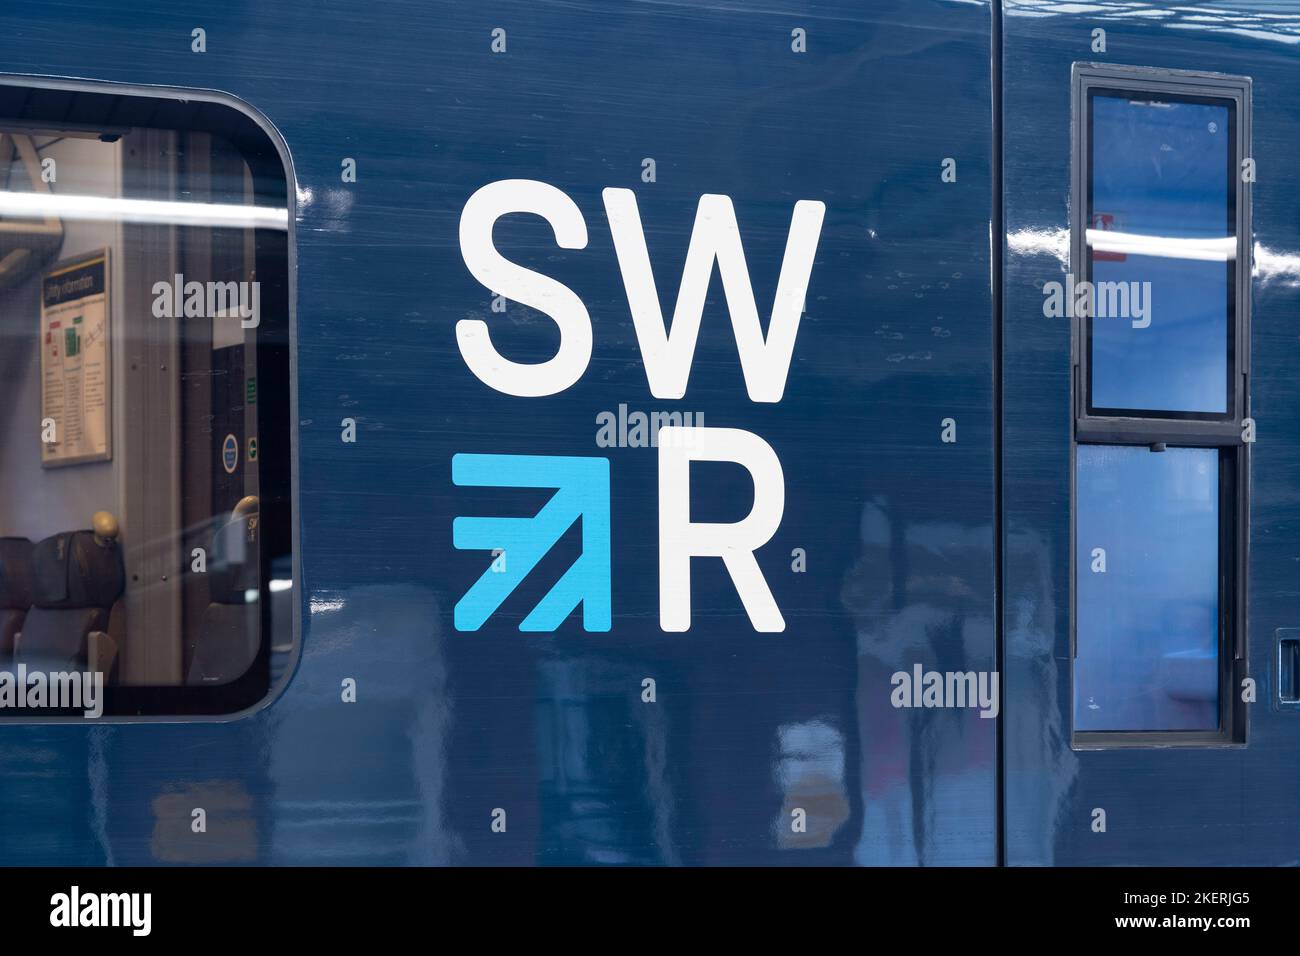 South Western Railway logo on the side of a passenger train coach. England. Concept: rail franchise, ticket prices, British train operating company Stock Photo